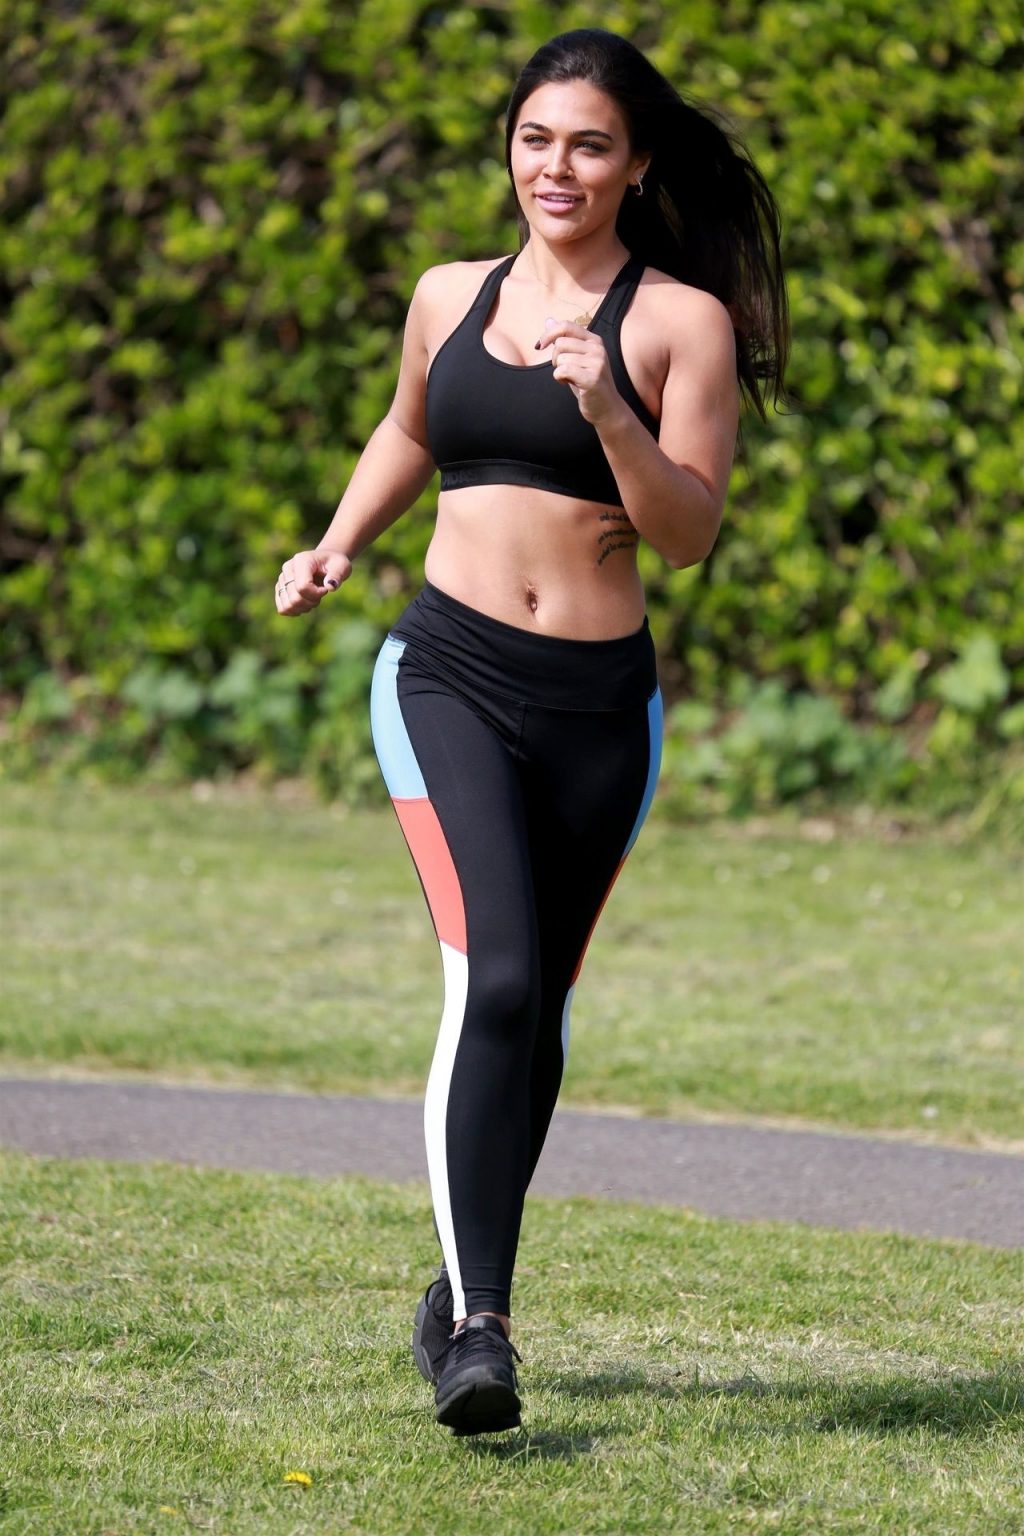 Lydia Clyma Looks Smoking Hot as She Gets Her Daily Exercise (31 Photos)